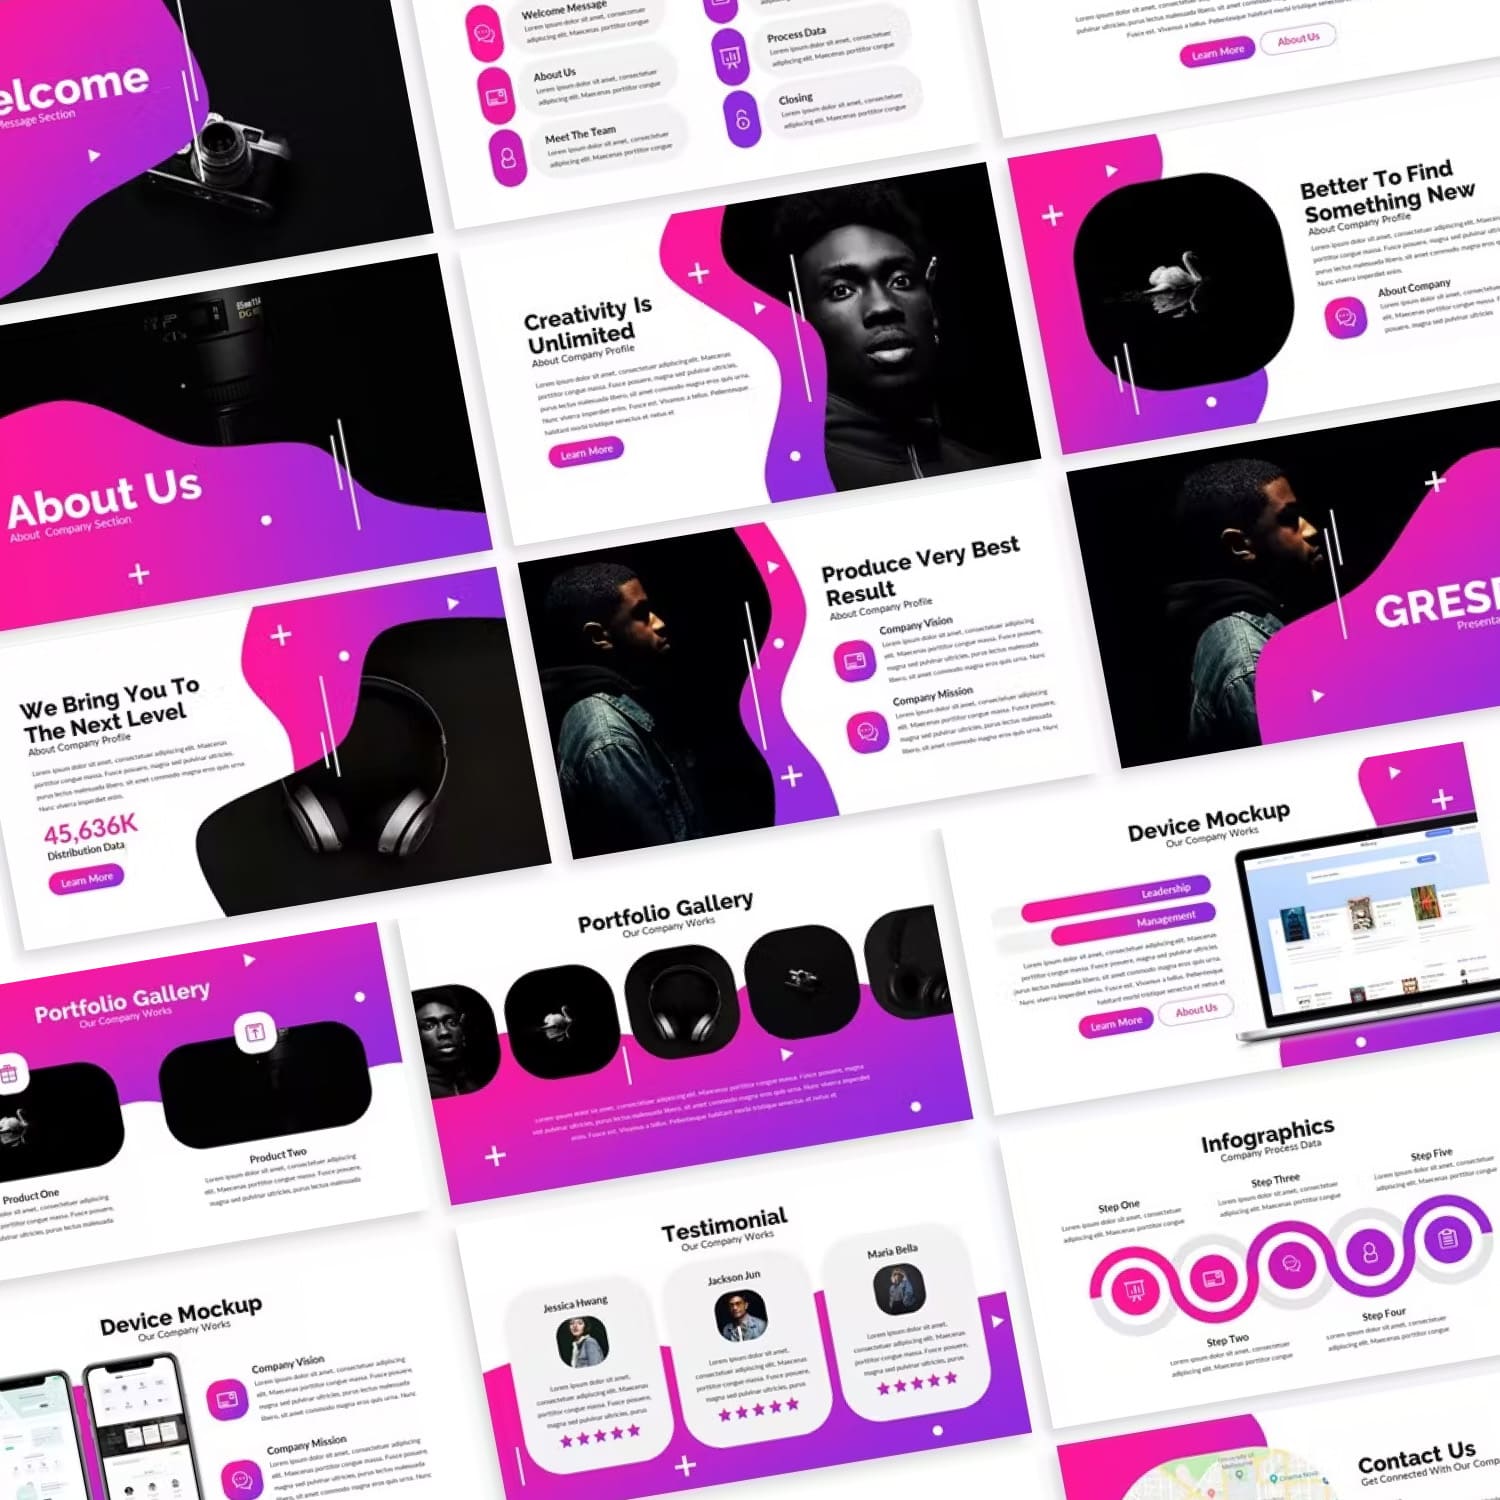 Gresdie gradient abstract powerpoint template from SlideFactory.